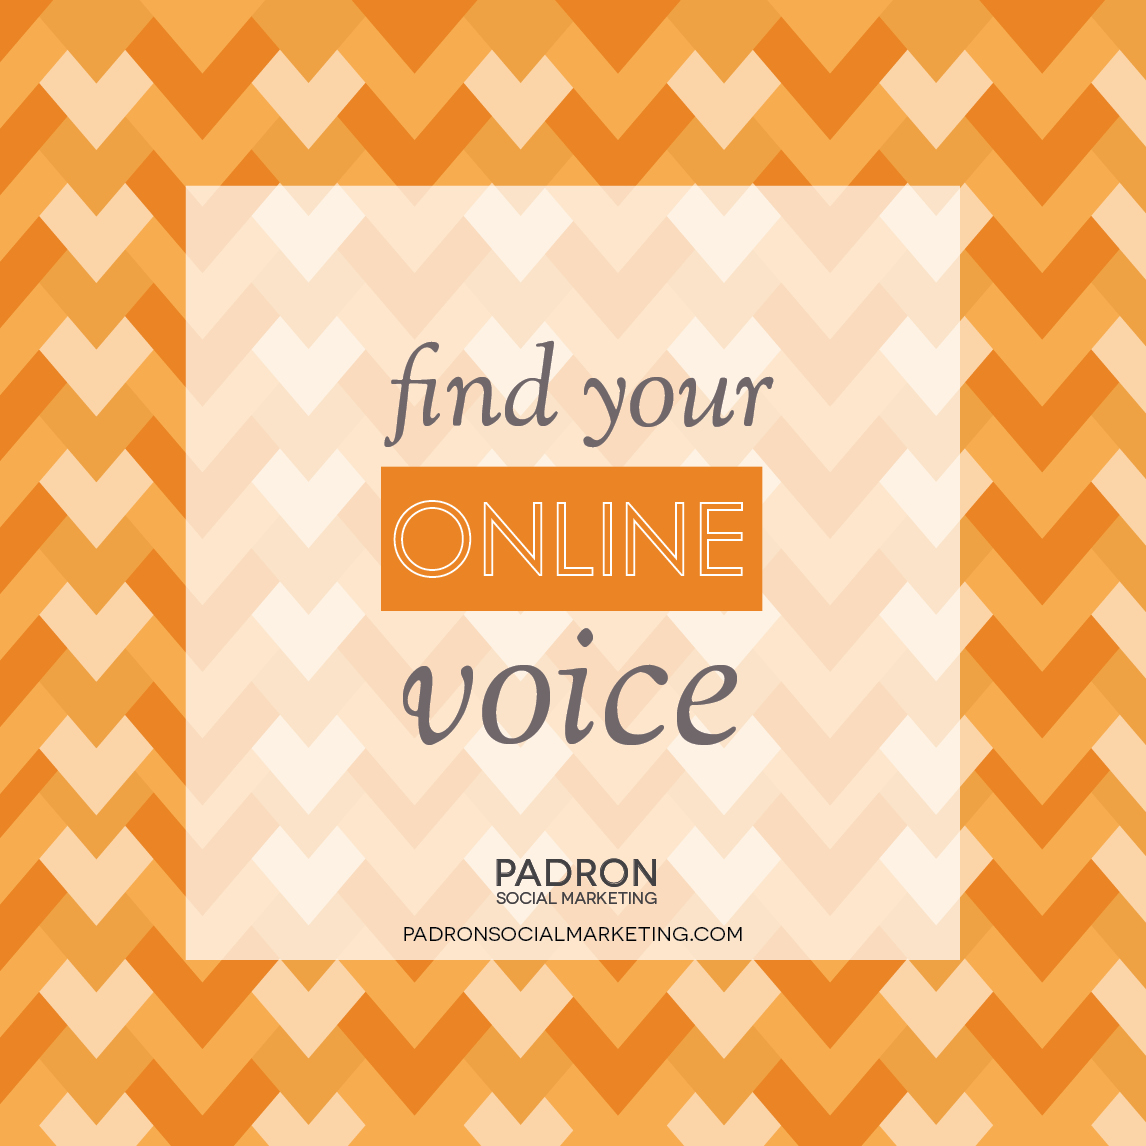 How to Find Your Online Voice